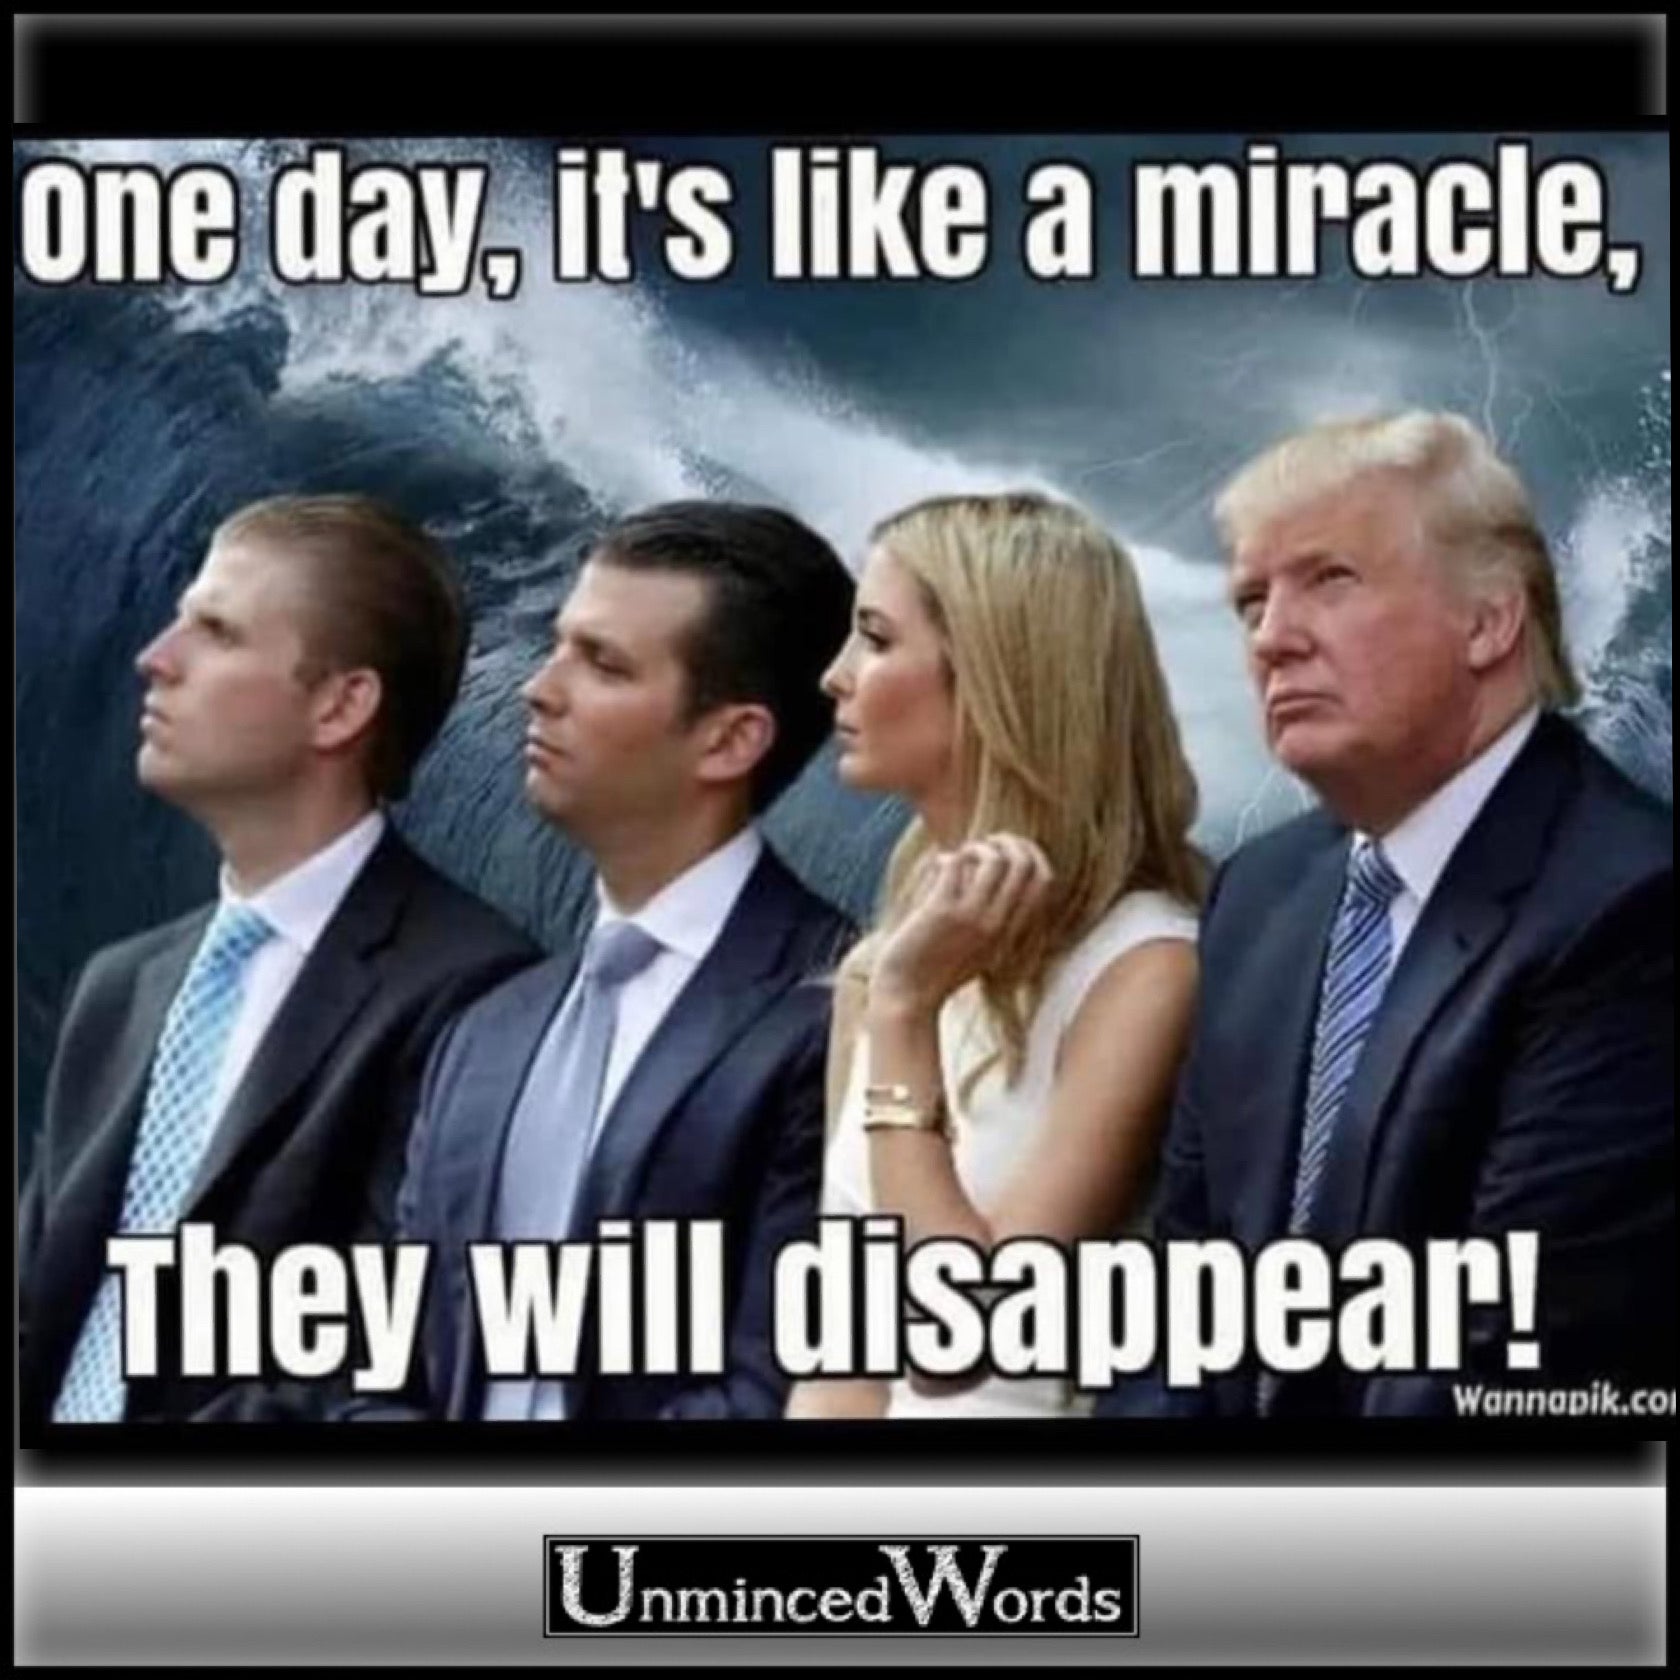 One day, like a miracle, they will disappear.